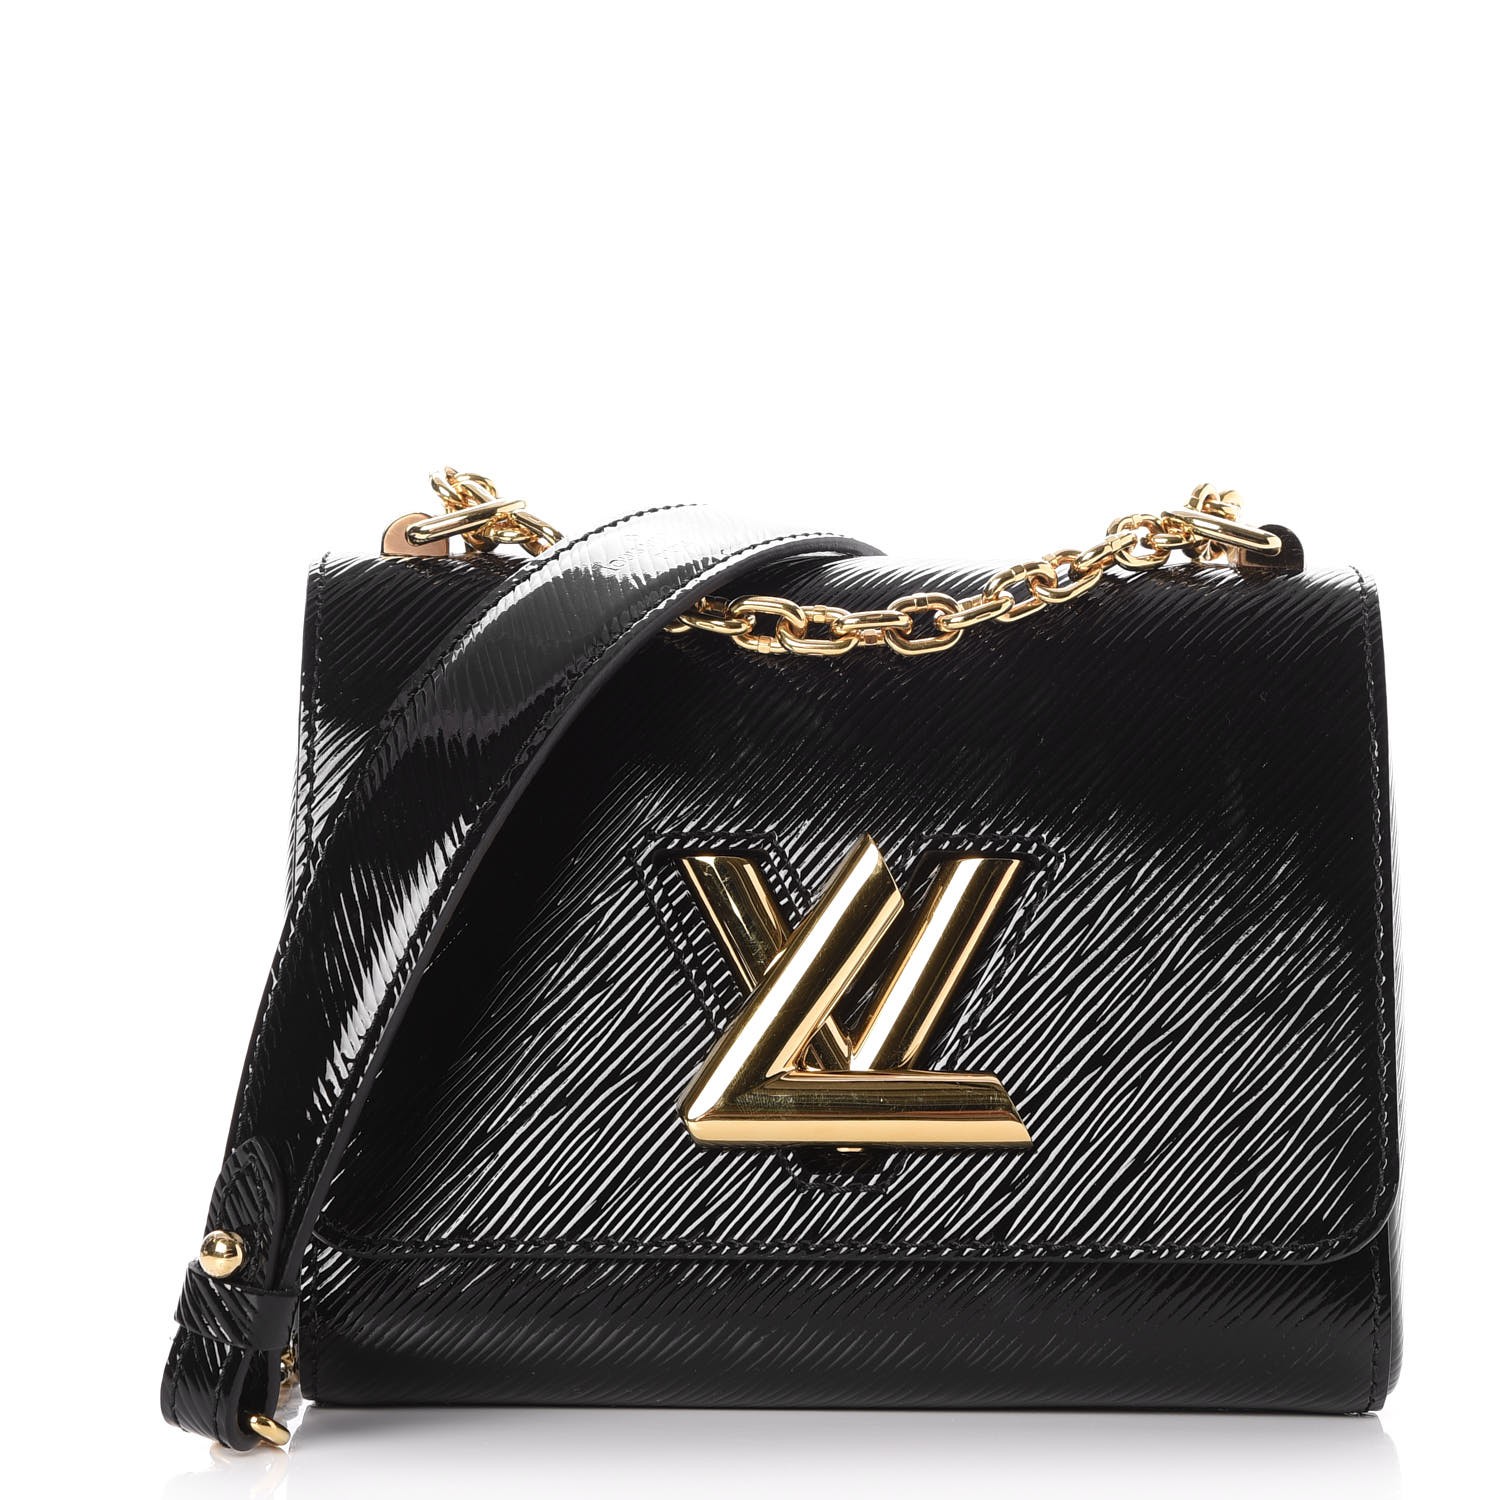 Louis Vuitton - Sophistication, with a Twist. Epi leather gives